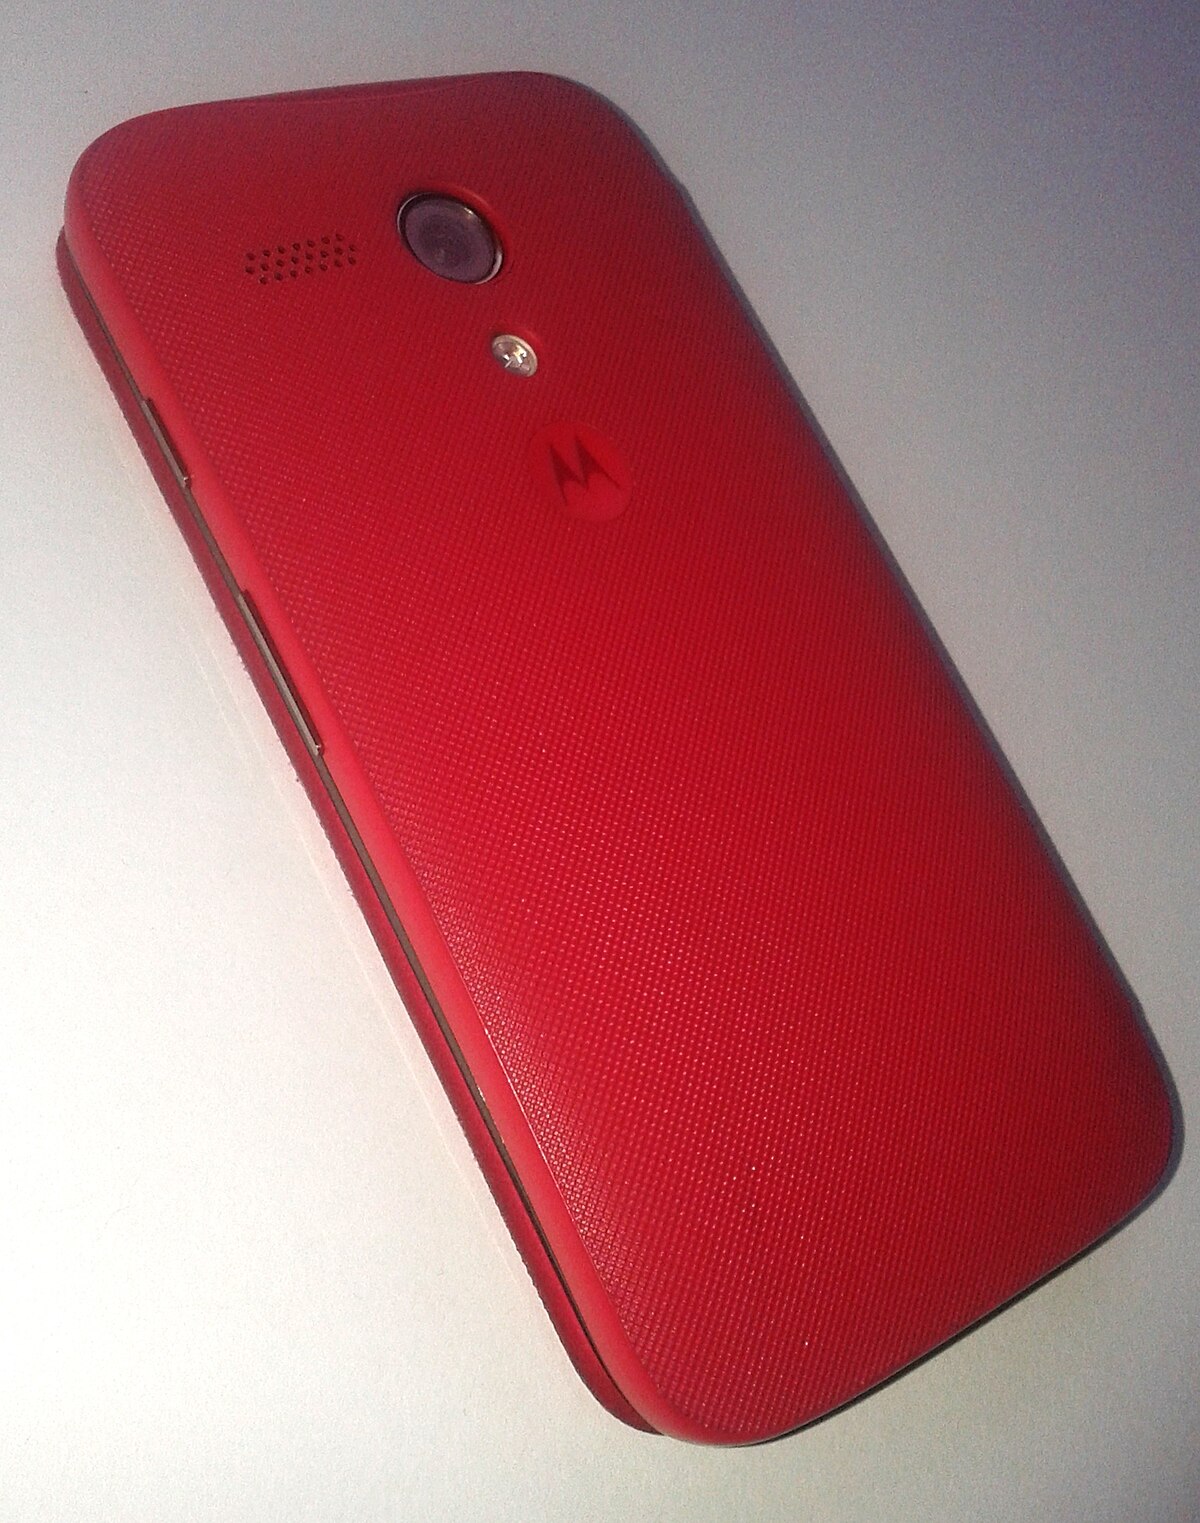 File:Moto G with red Flip Shell.jpg - Wikimedia Commons